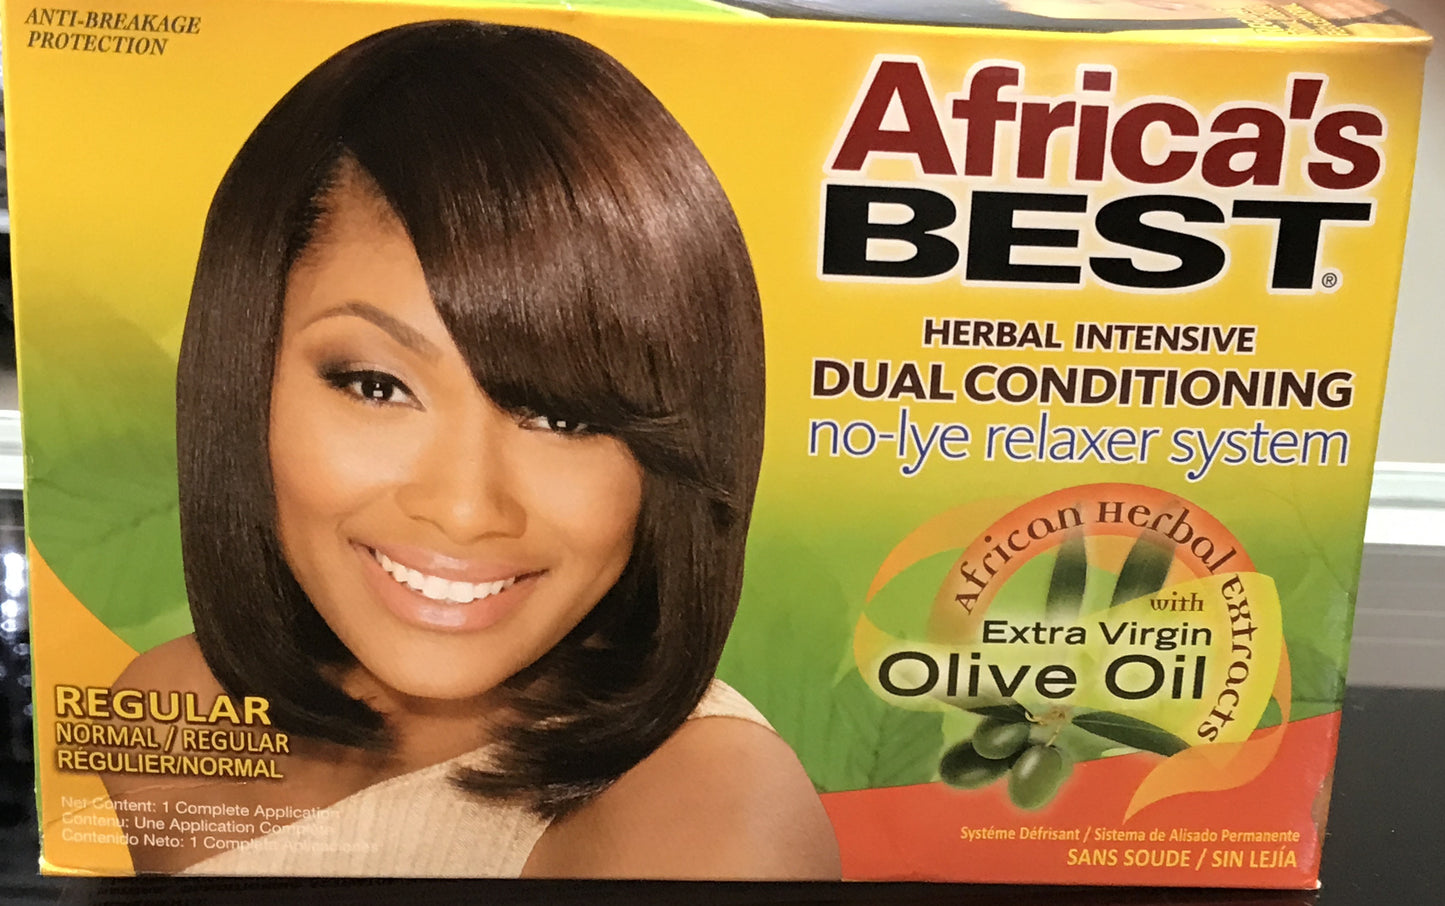 AFRICA'S BEST DUAL CONDITIONING NO-LYE RELAXER SYSTEM KIT - REGULAR